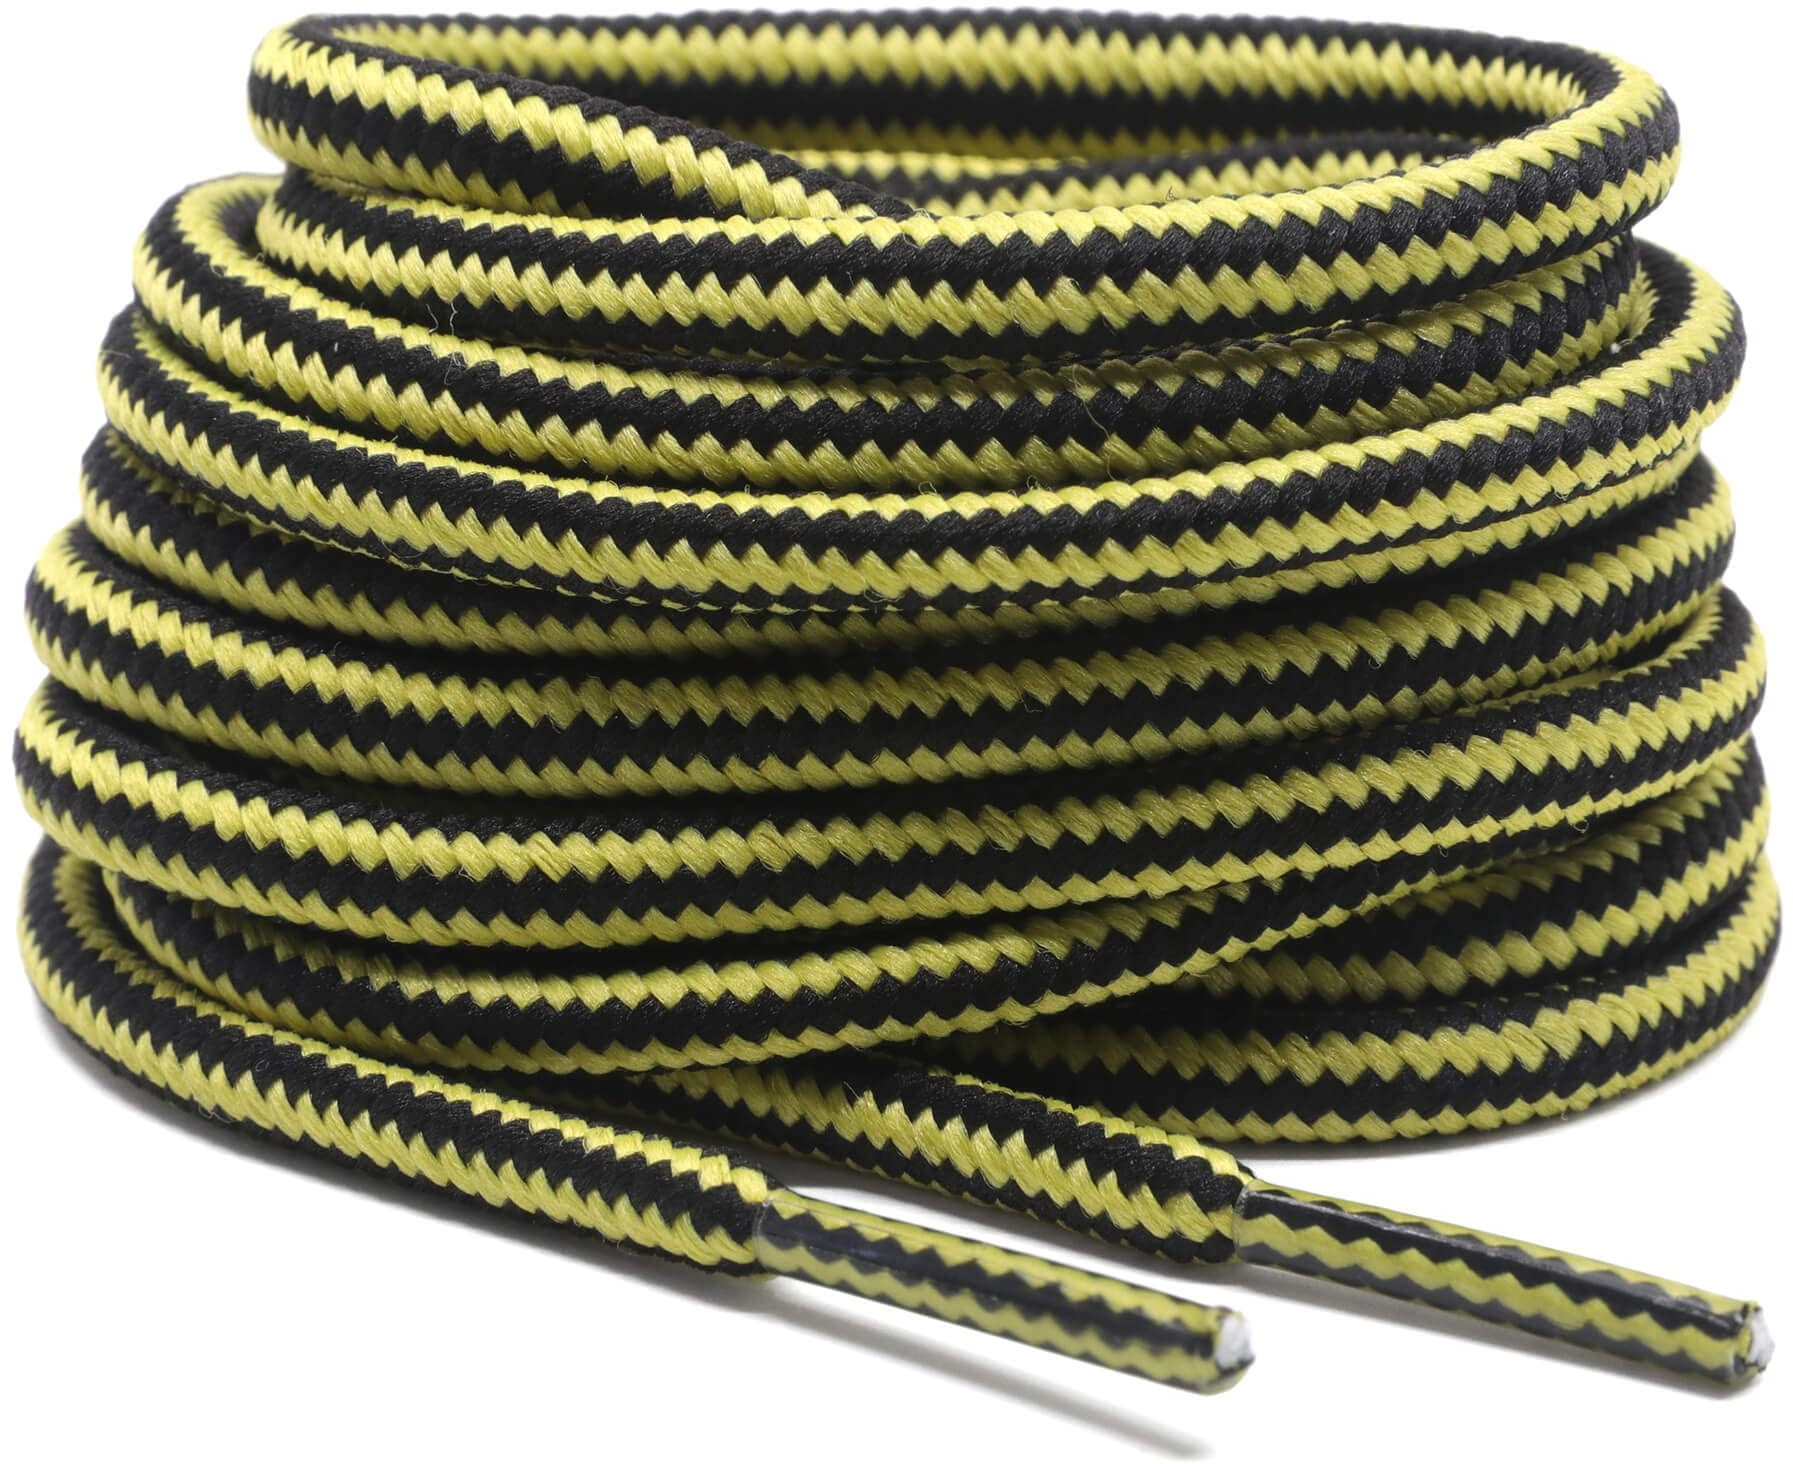 DELELE 2 Pair Rugged Wear Boot Laces Outdoor Hiking Shoelaces Round Rope Bright Yellow Black Striped Shoe Lace Boot Shoe Strings-71 inches - 71\"Inch (180CM)